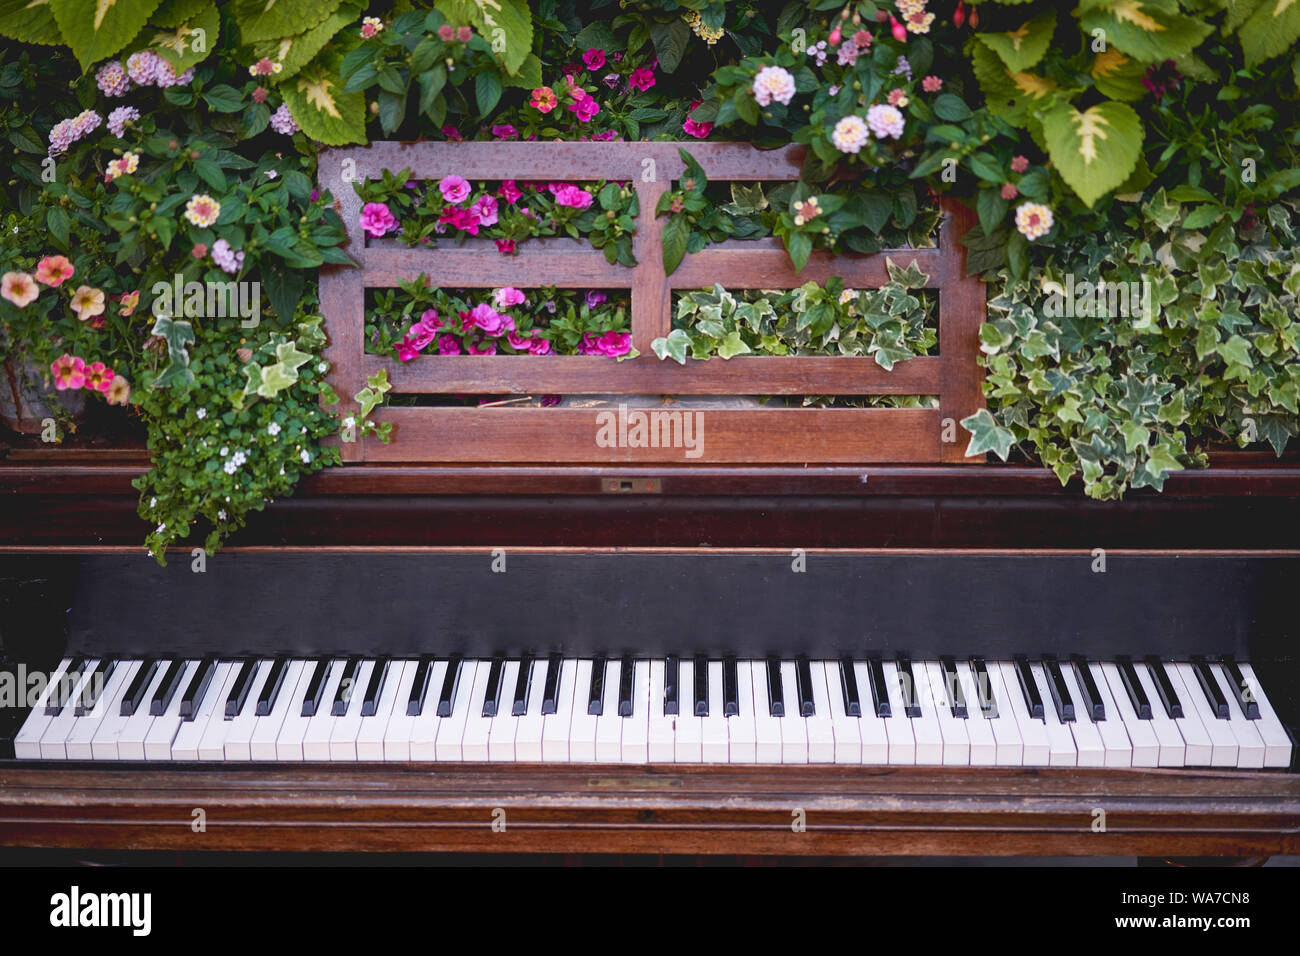 A vintage piano with black and white keys decorated with ivy and other flowers. Landscape format. Stock Photo